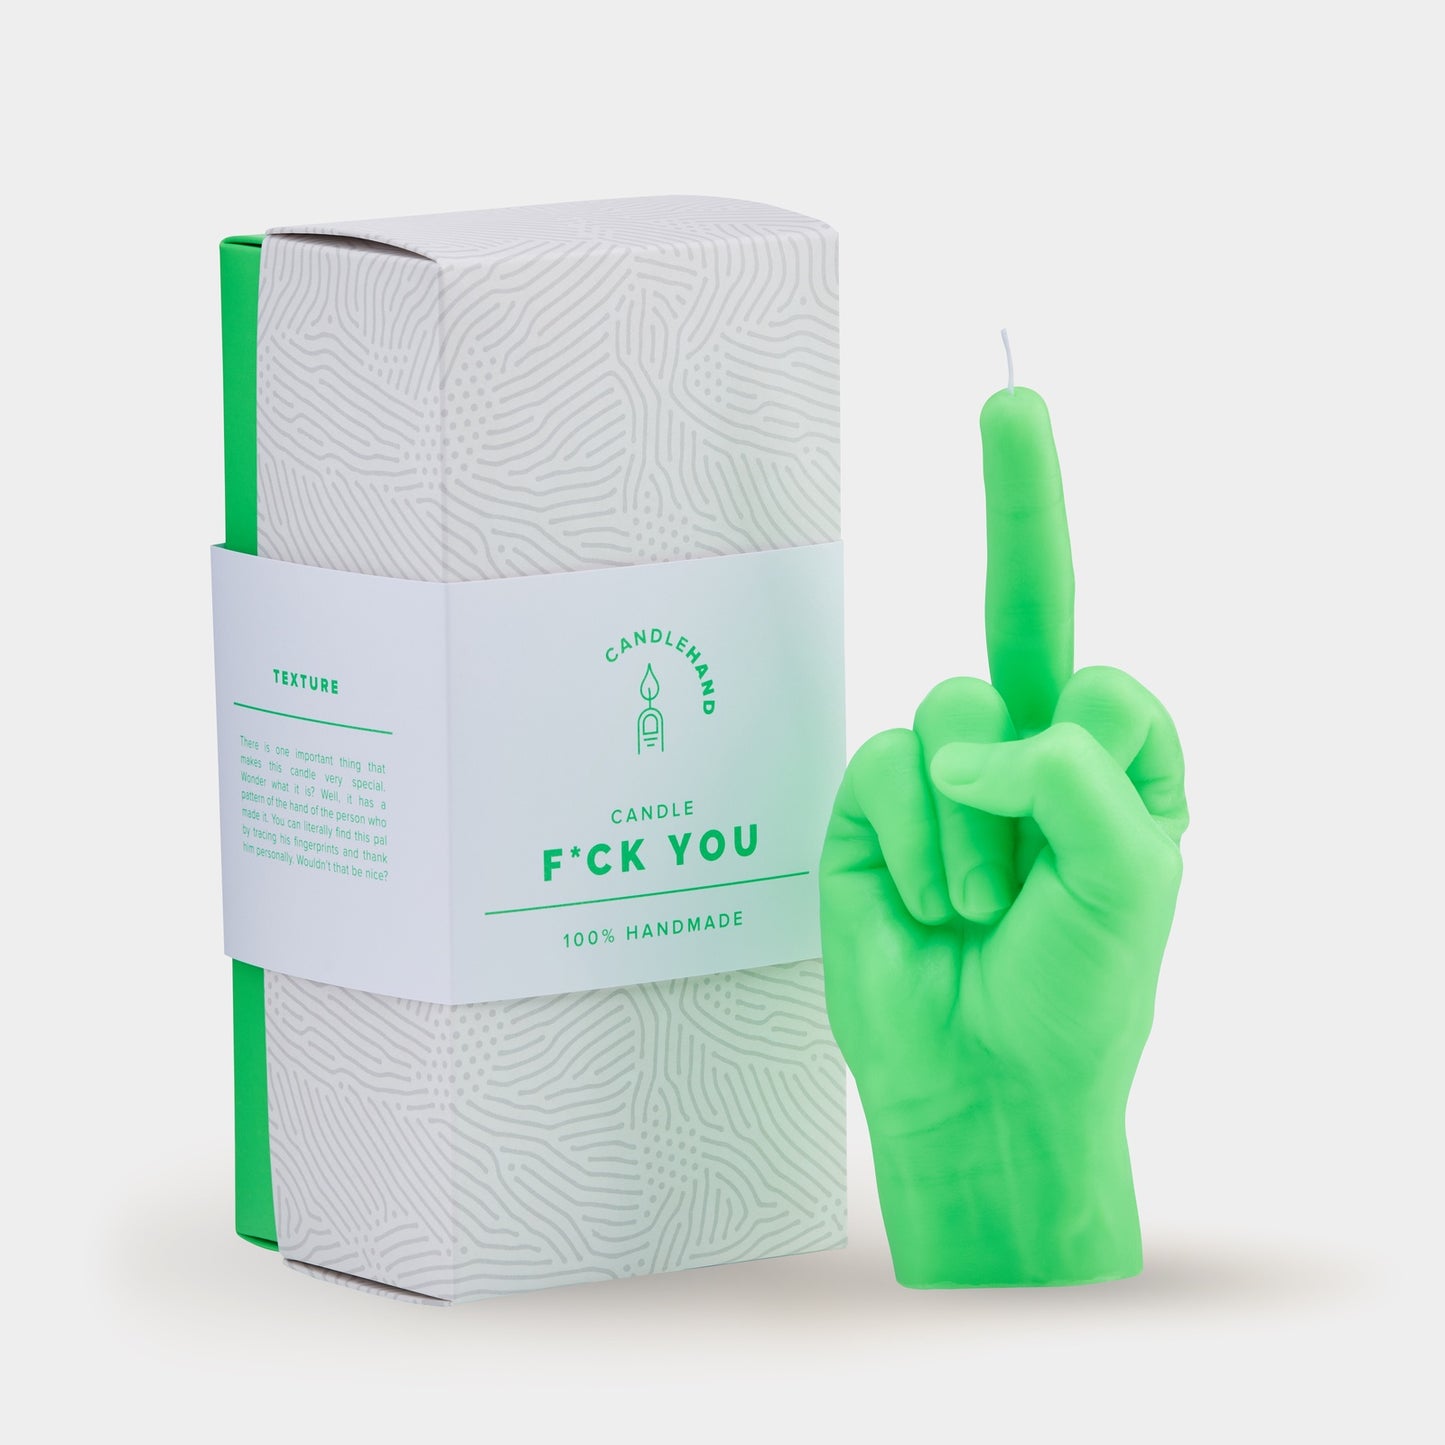 "Fcuk you" Neon Hand Gesture Candle